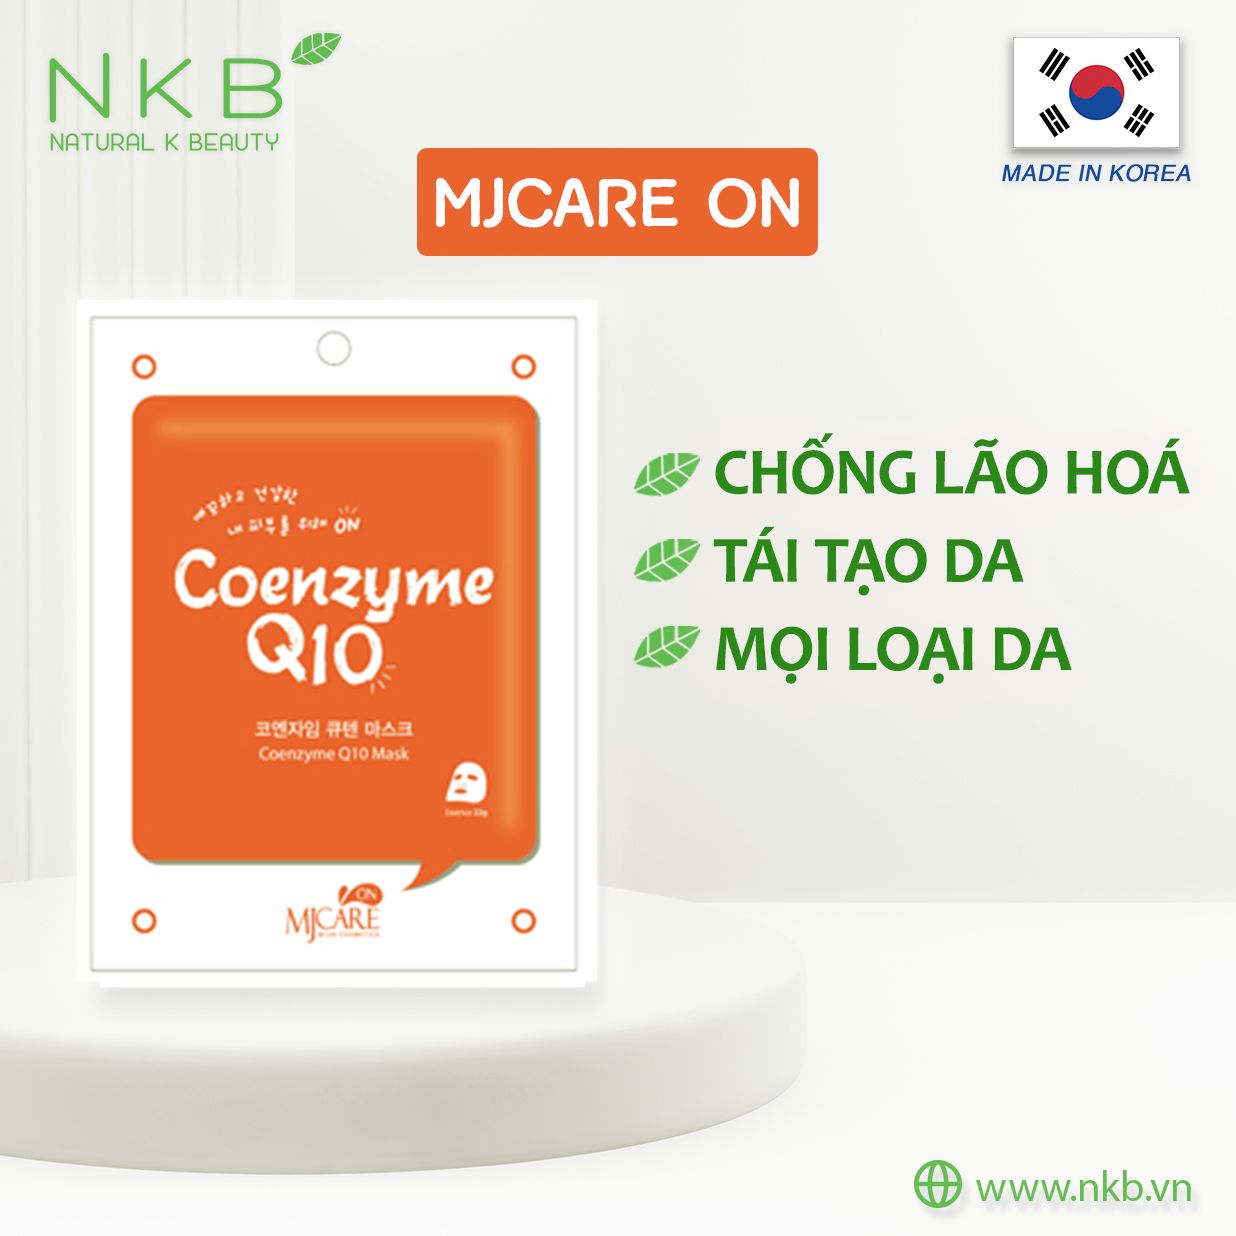  MJCARE ON COENZYME Q10 - Mặt nạ Coenzyme Q10 